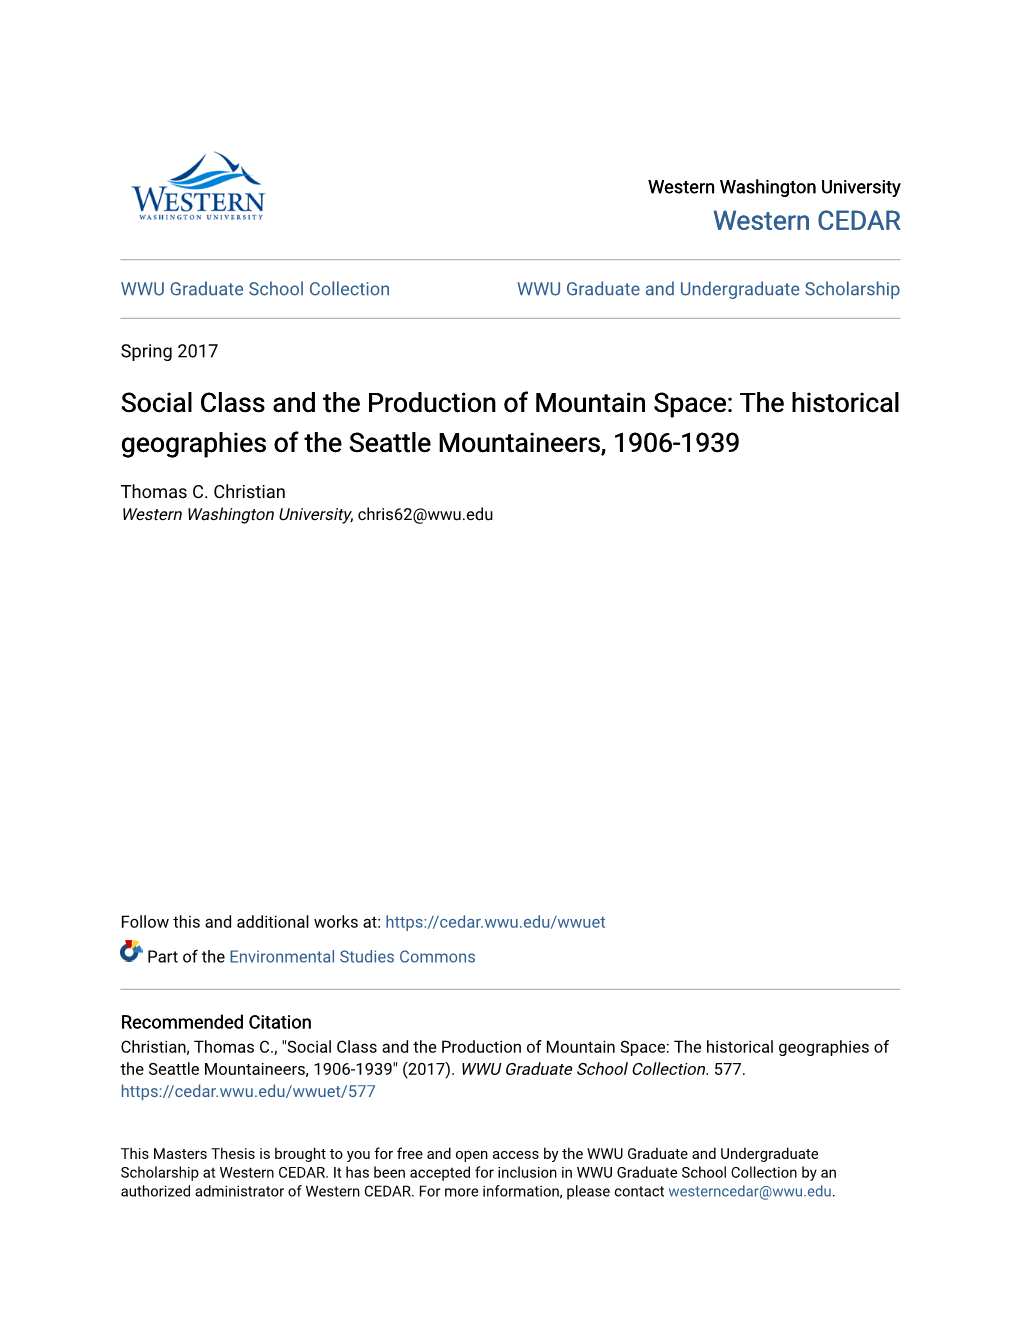 Social Class and the Production of Mountain Space: the Historical Geographies of the Seattle Mountaineers, 1906-1939